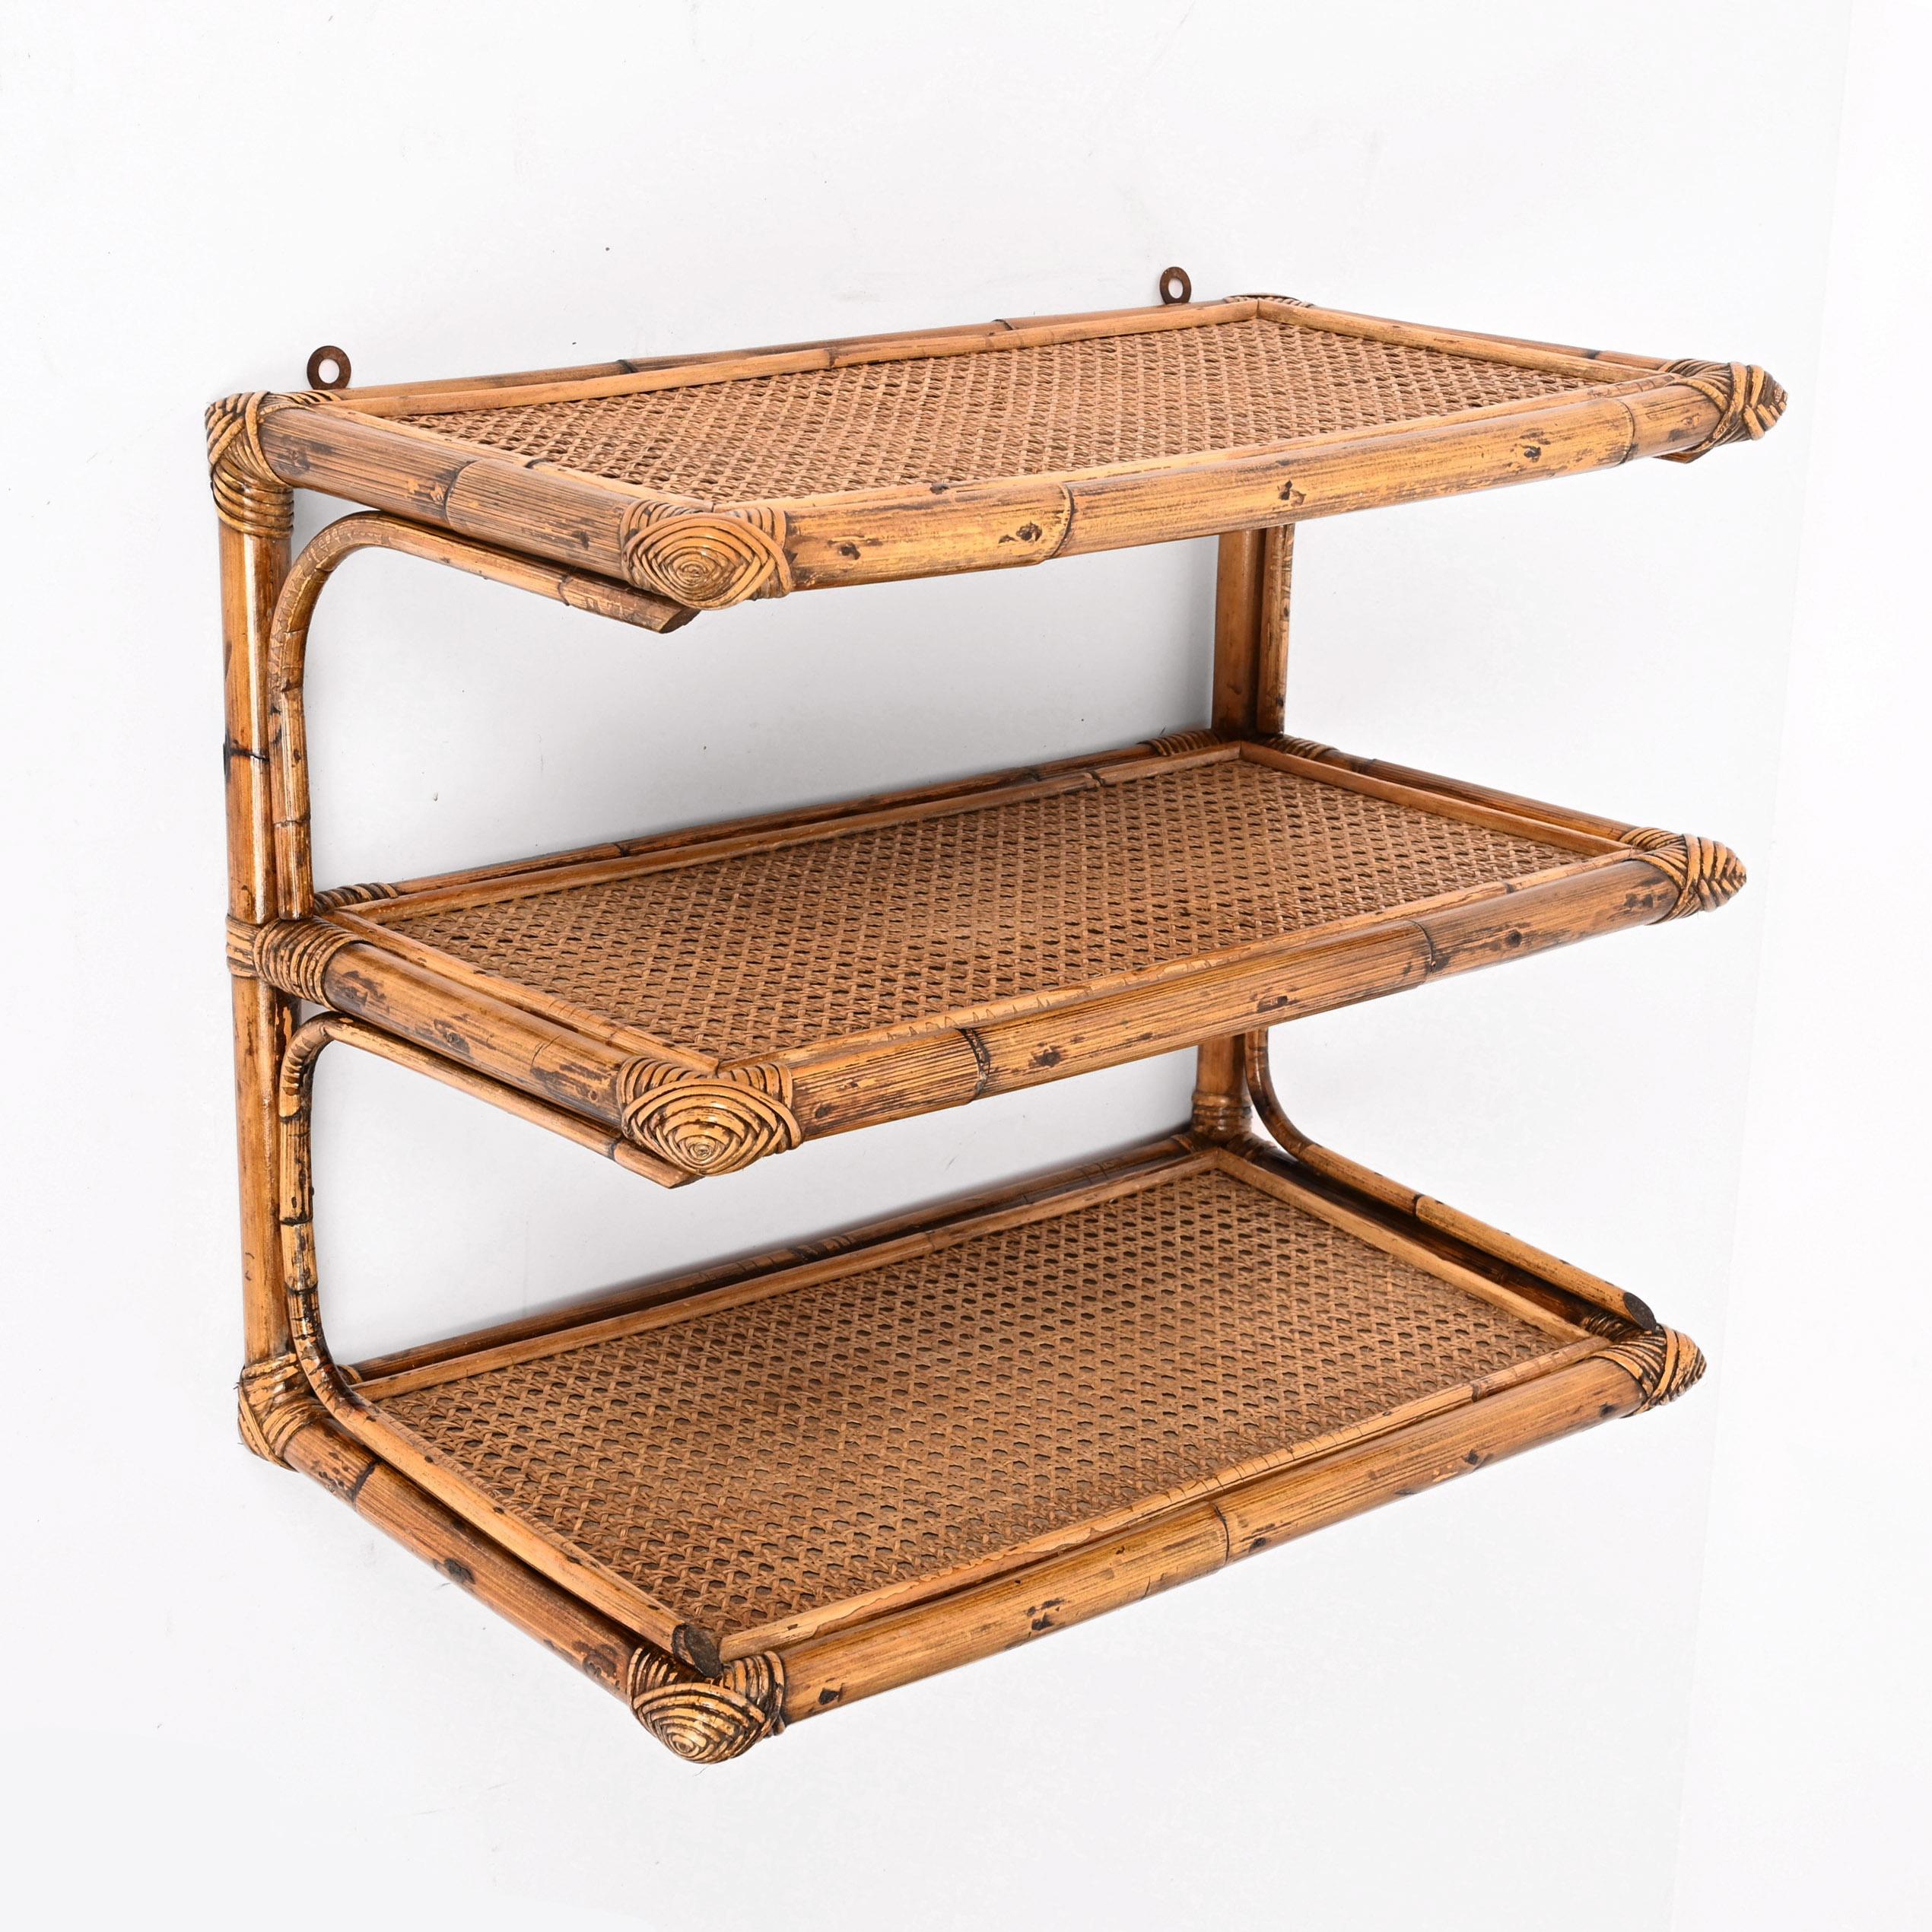 Stunning midcentury rattan, bamboo and vienna straw three-tier wall shelf. Vivai del Sud probably designed this amazing piece in Italy during the 1960s. 

This piece is unique as it comes with wooden shelves finished with Vienna straw, a